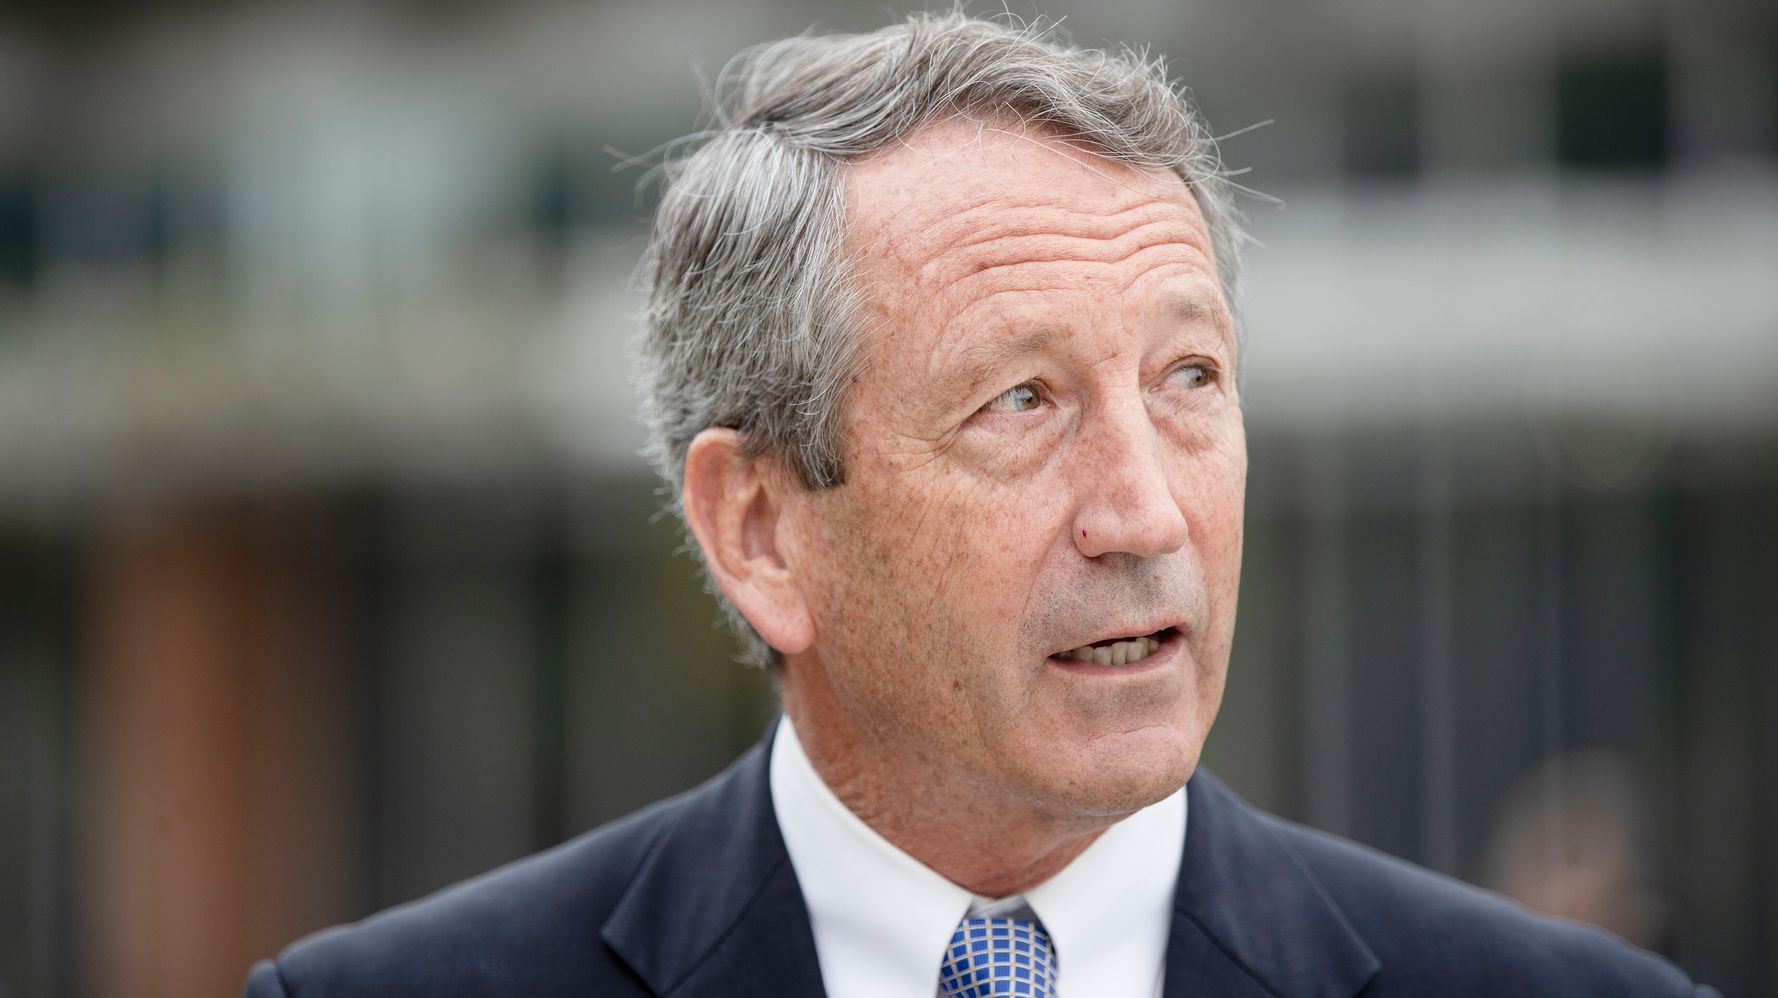 Republican Mark Sanford Drops Out Of 2020 Presidential Race HuffPost